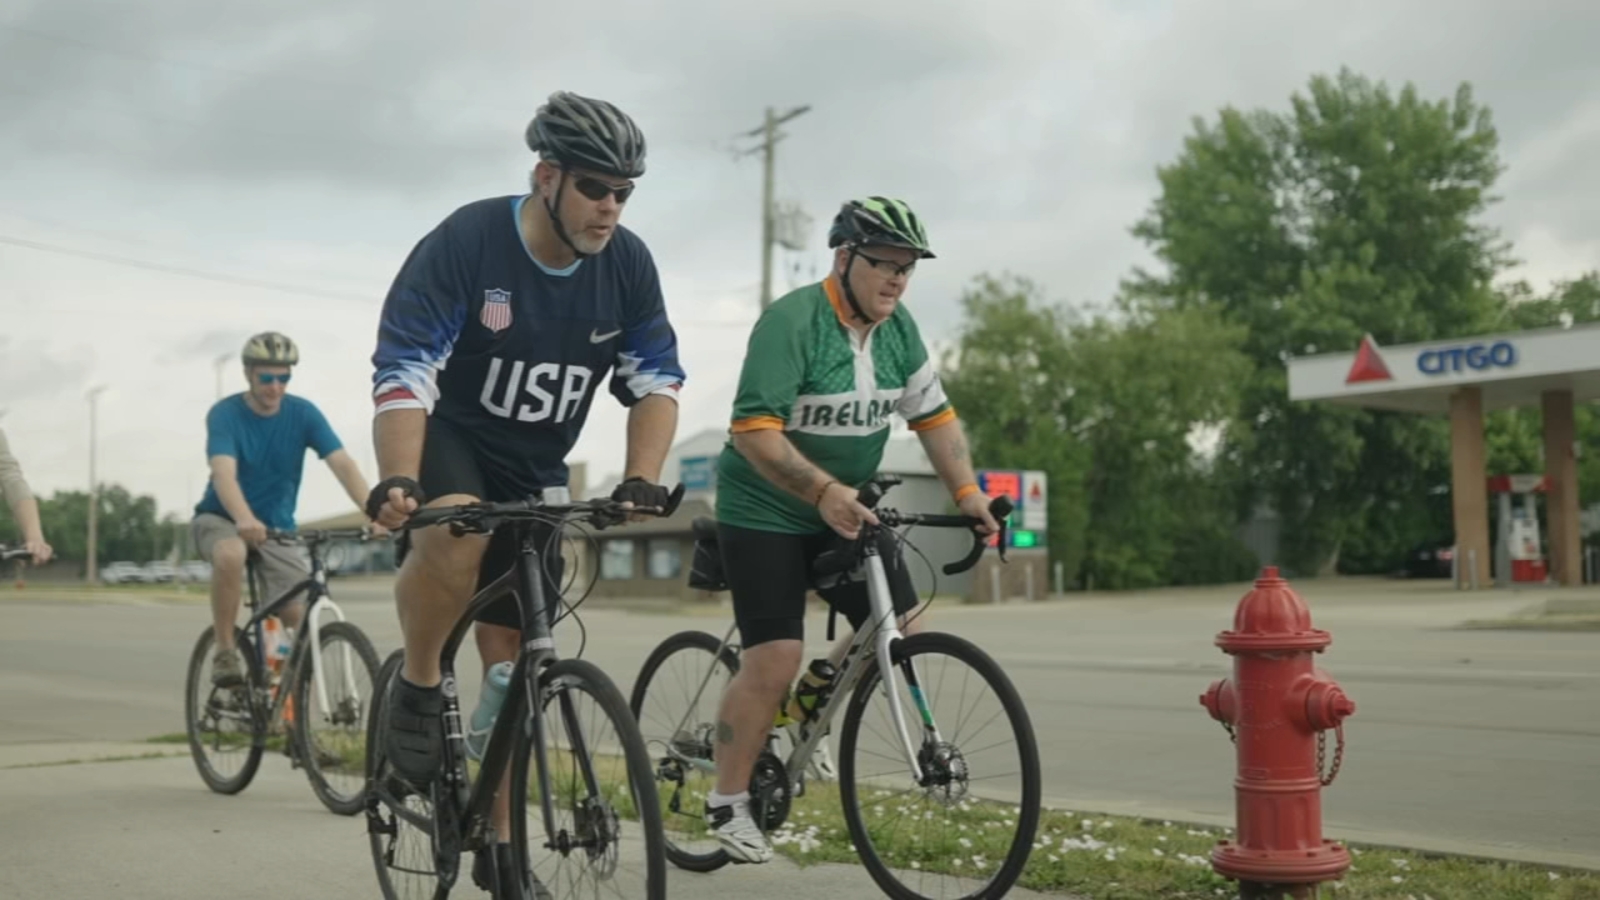 Ride for the Troops, fundraiser for US military members and their families, kicks off at Webb Chevy in Plainfield, Illinois [Video]